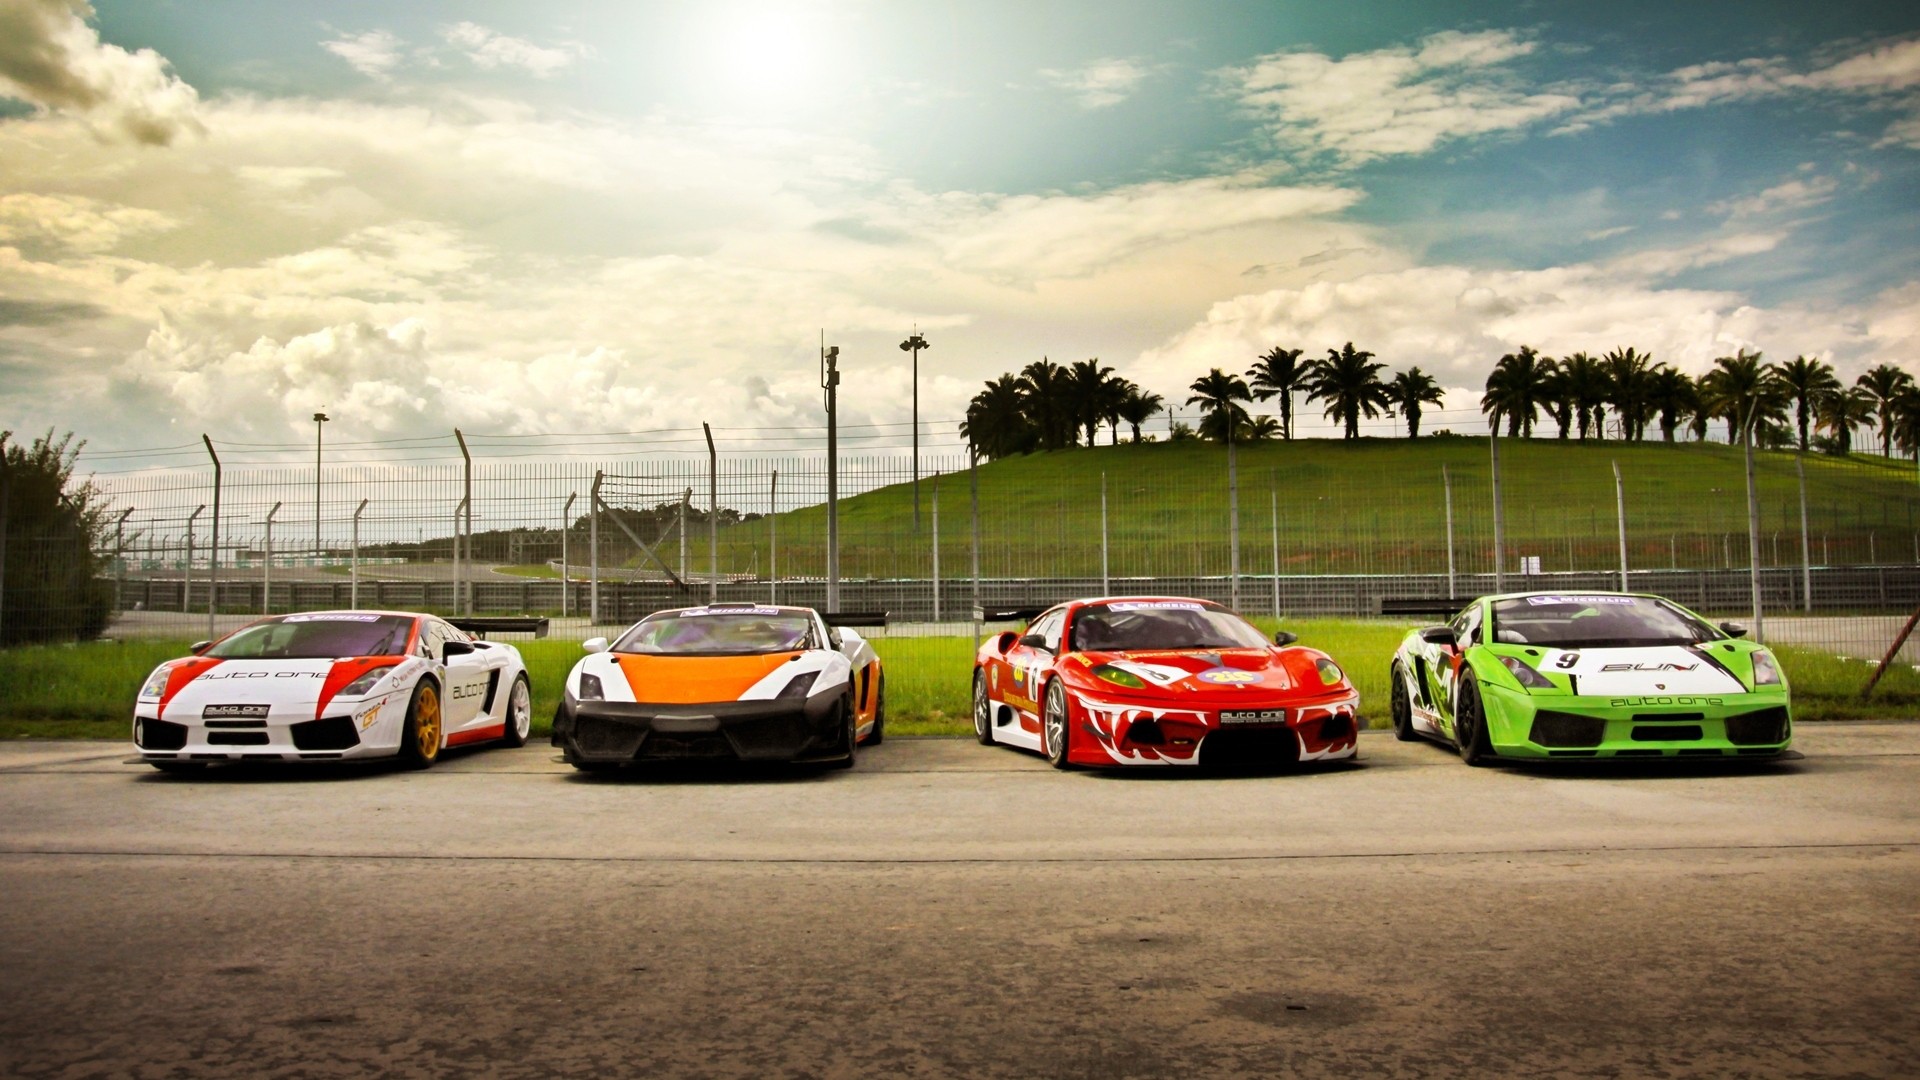 Wallpapers Of Sports Car Racing